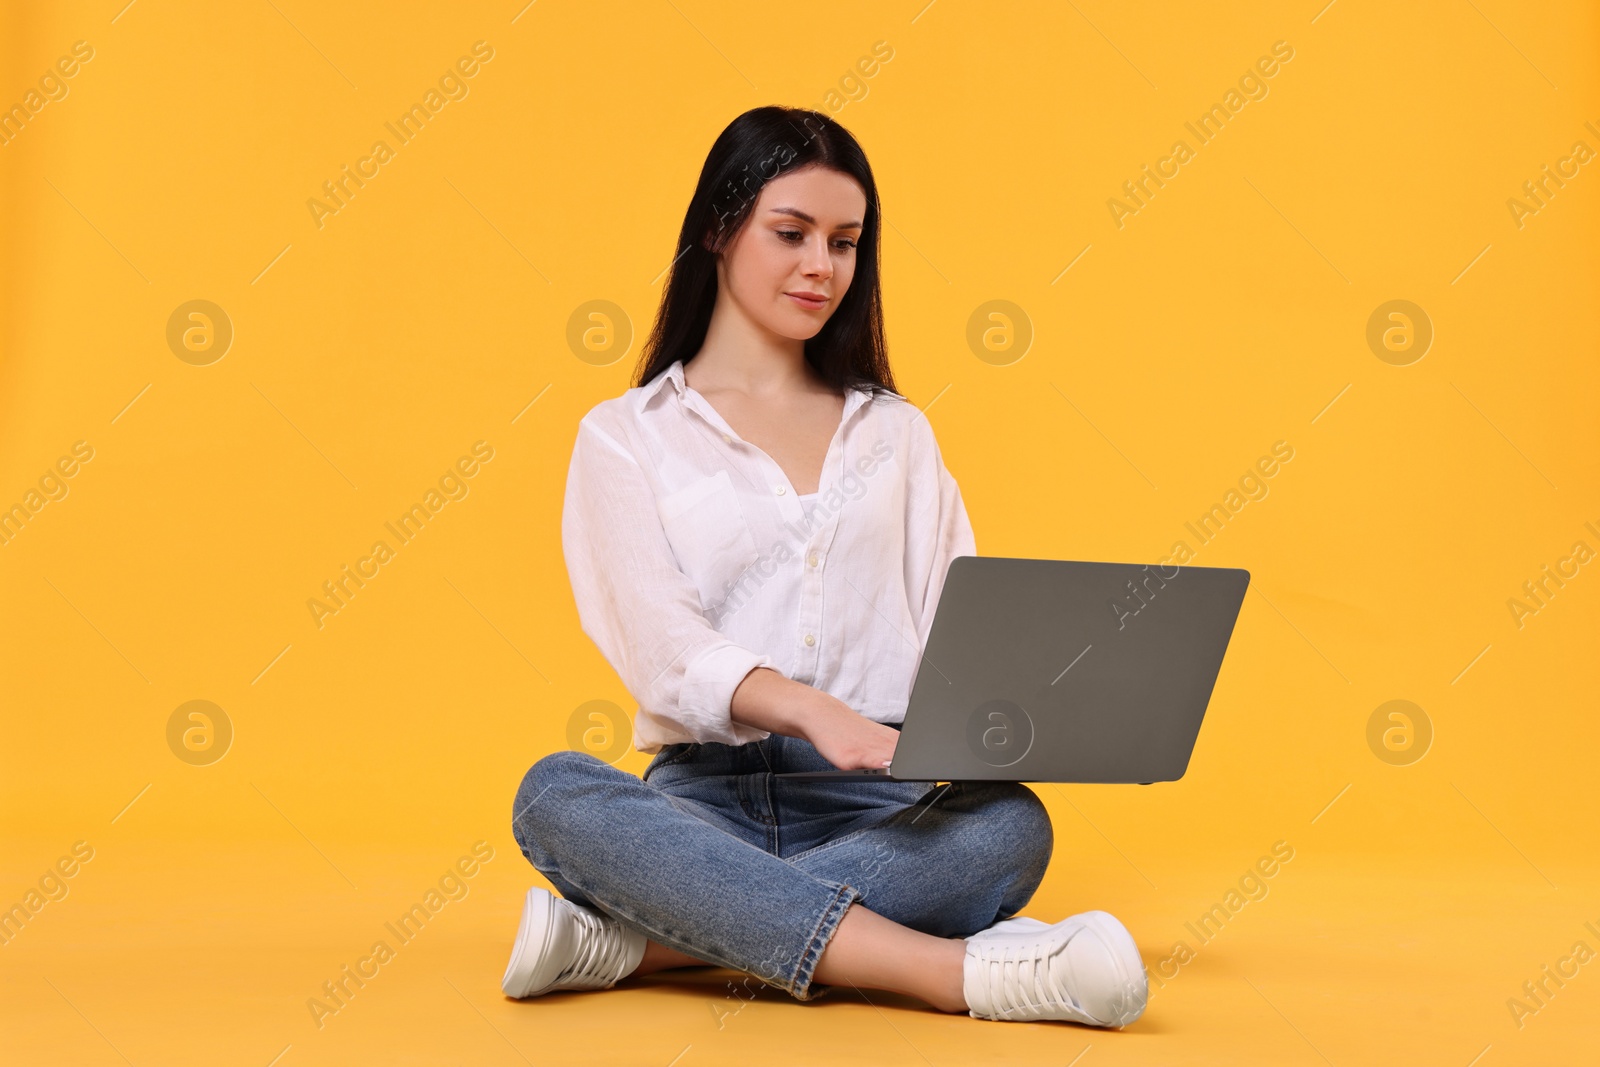 Photo of Student with laptop sitting on yellow background